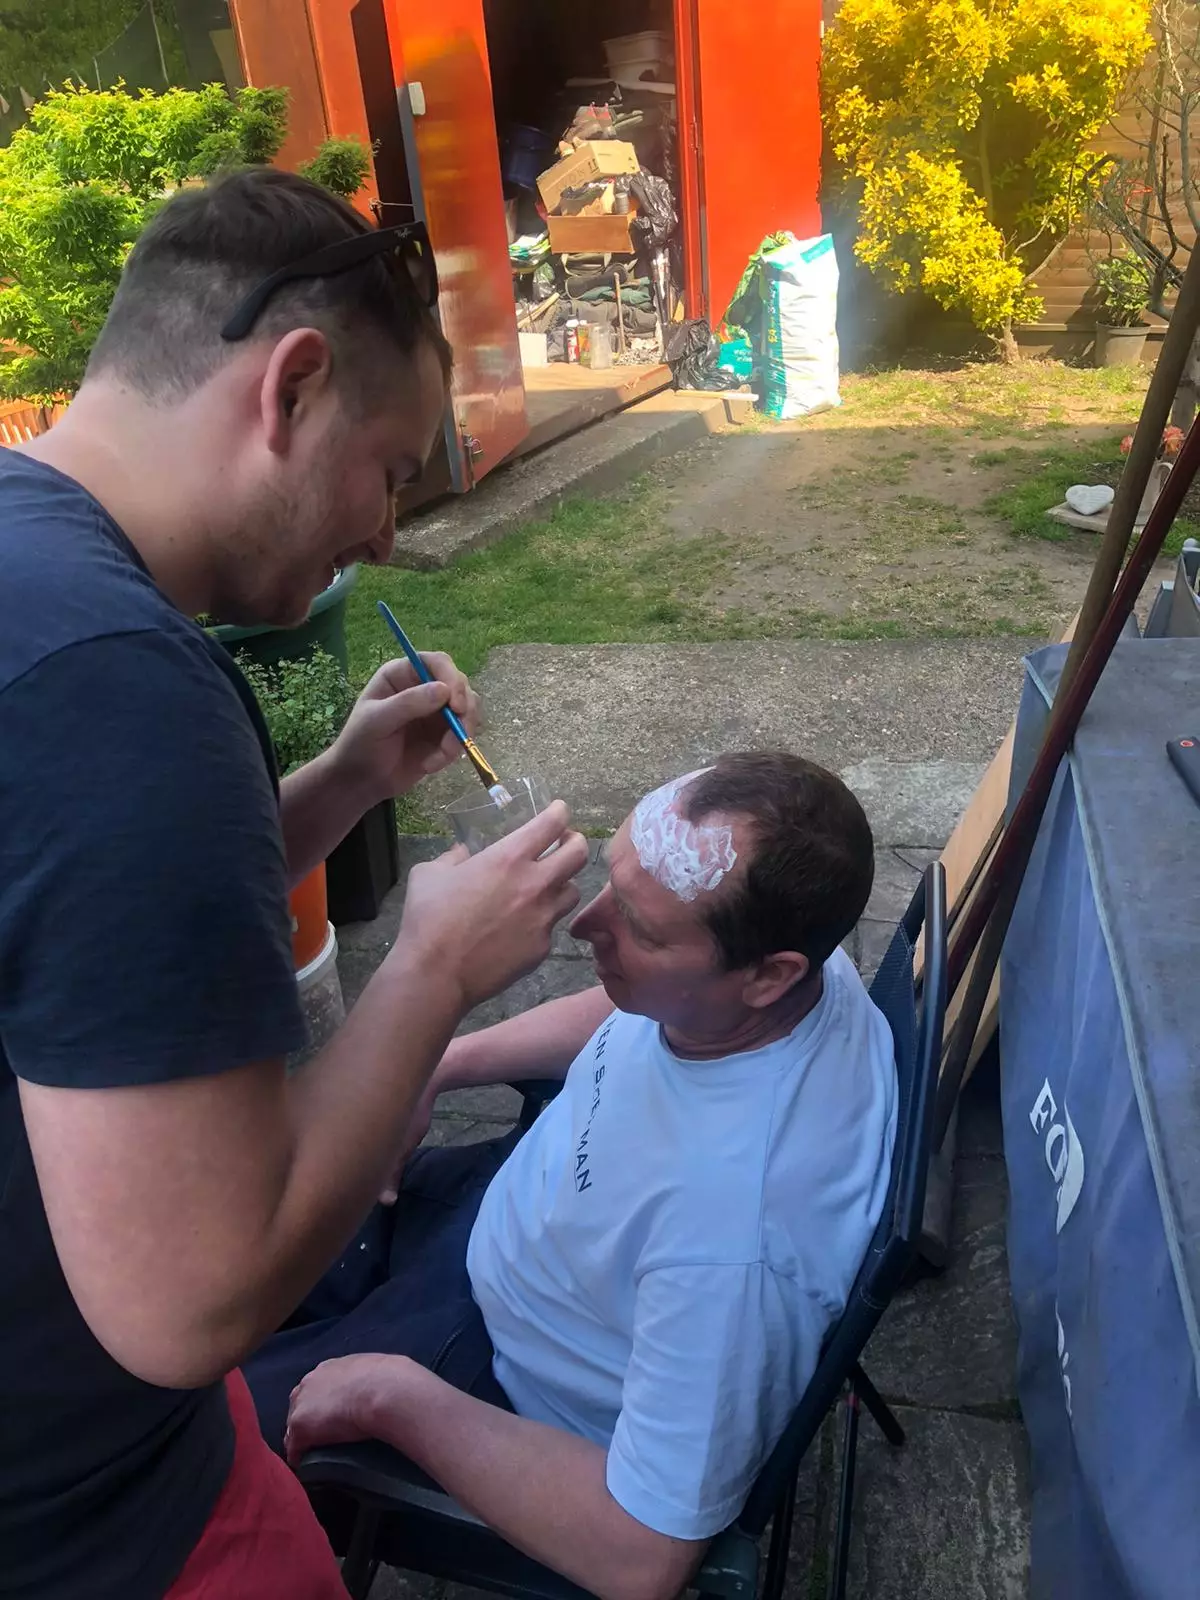 Nick used glue to stick his trimmings onto his dad's head.